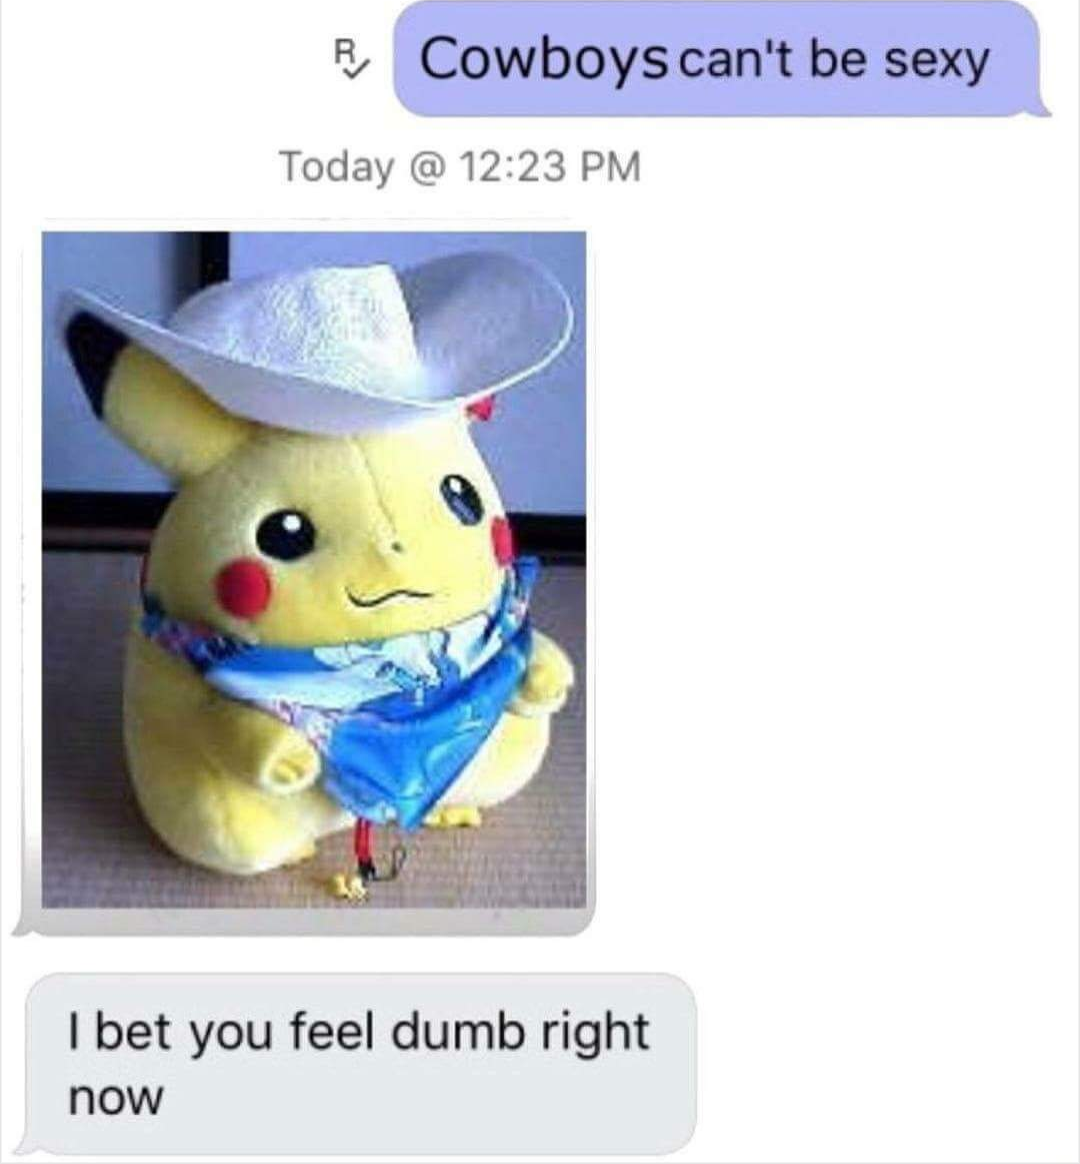 cowboys can t be sexy i bet you feel dumb right now - R Cowboys can't be sexy Today @ I bet you feel dumb right now